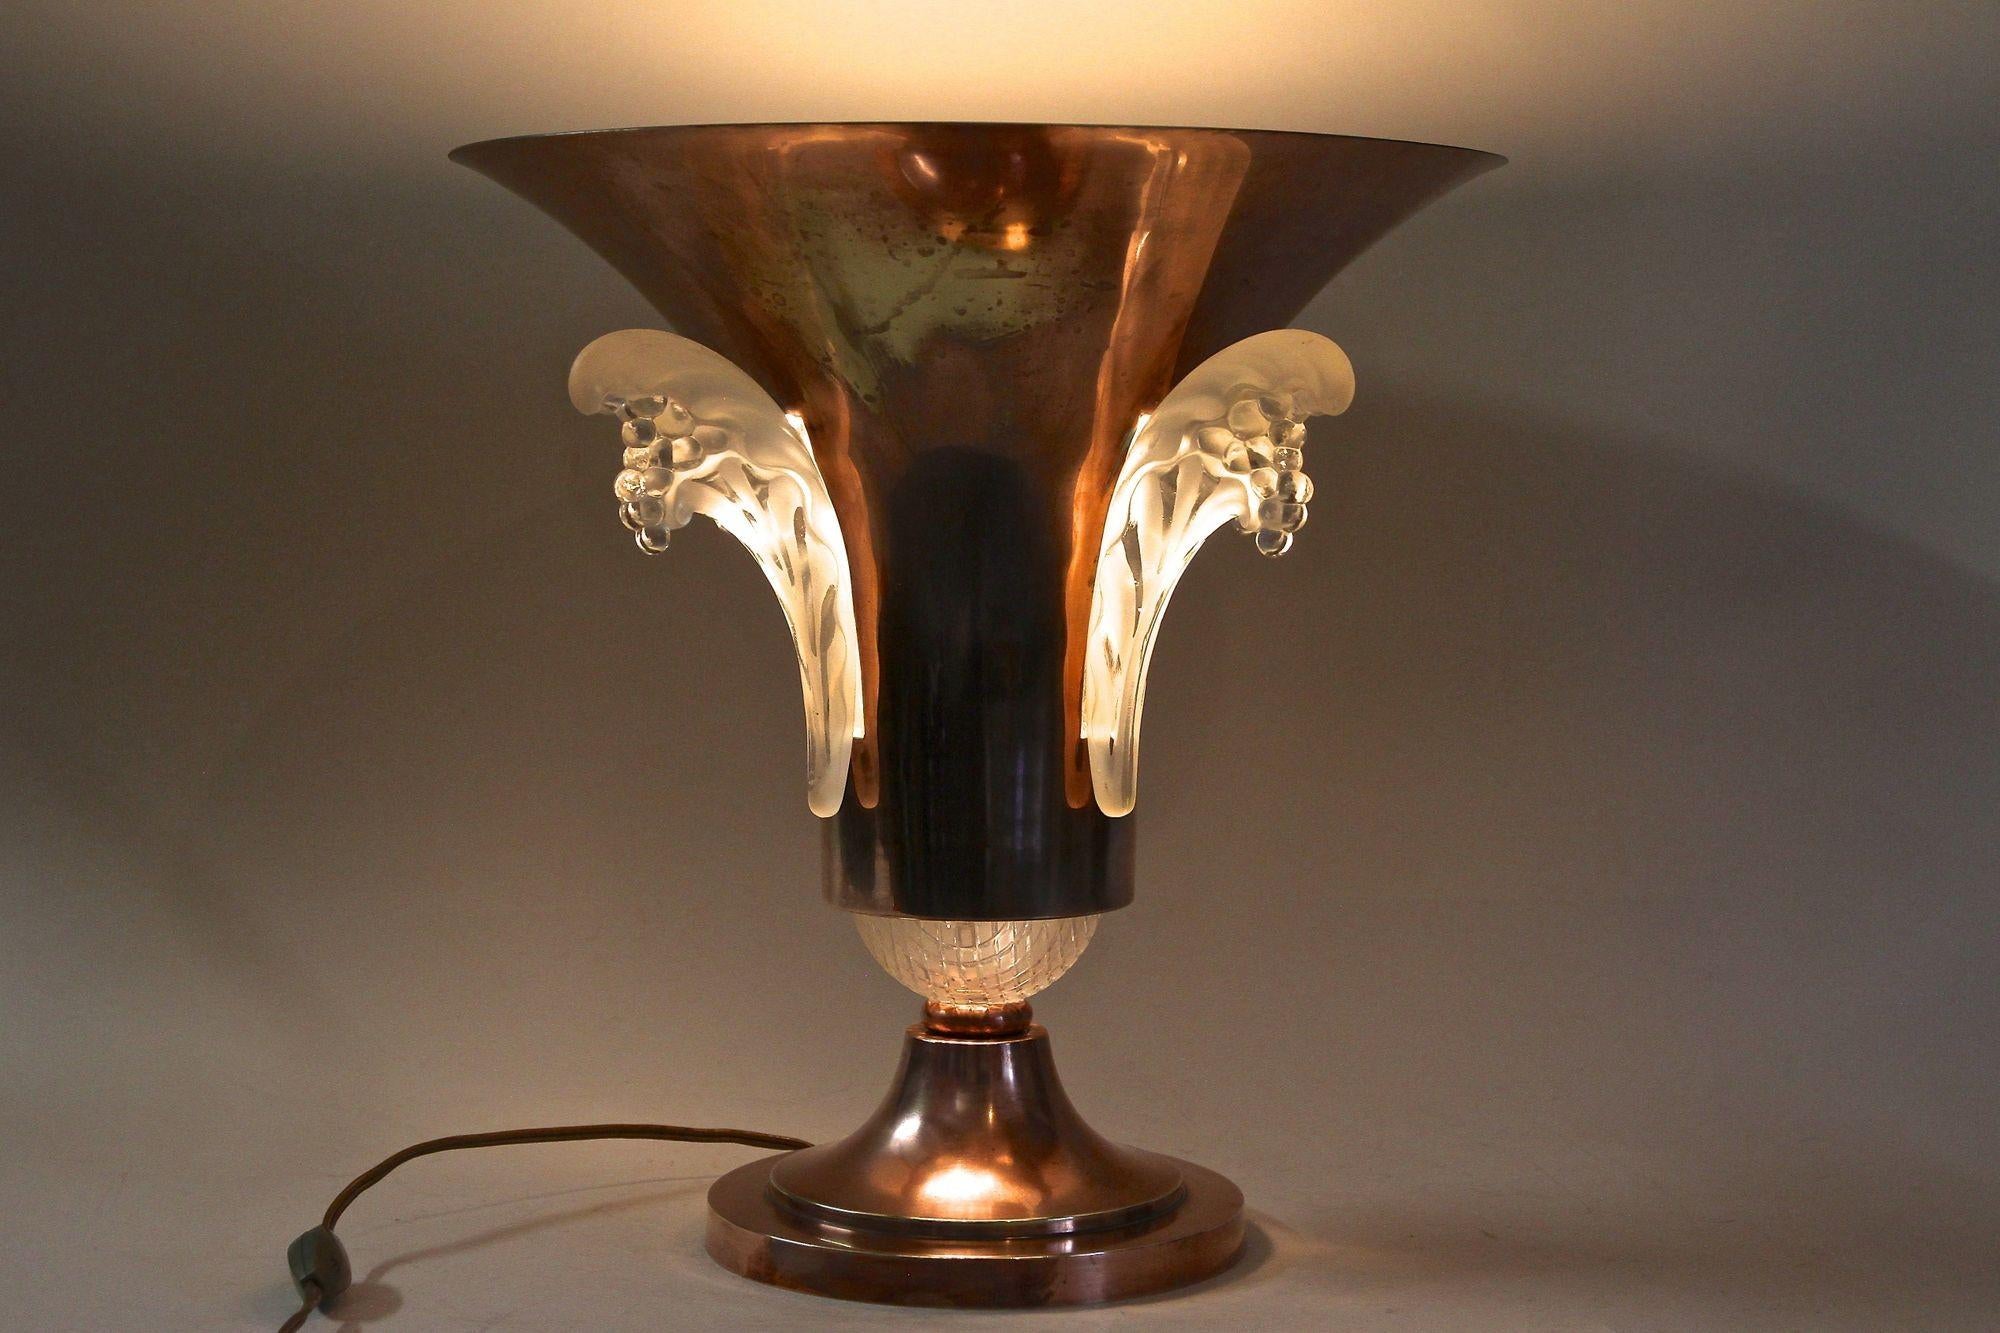 Art Deco Copper Table Lamp with Lalique Glass Elements, France, circa 1925 For Sale 15